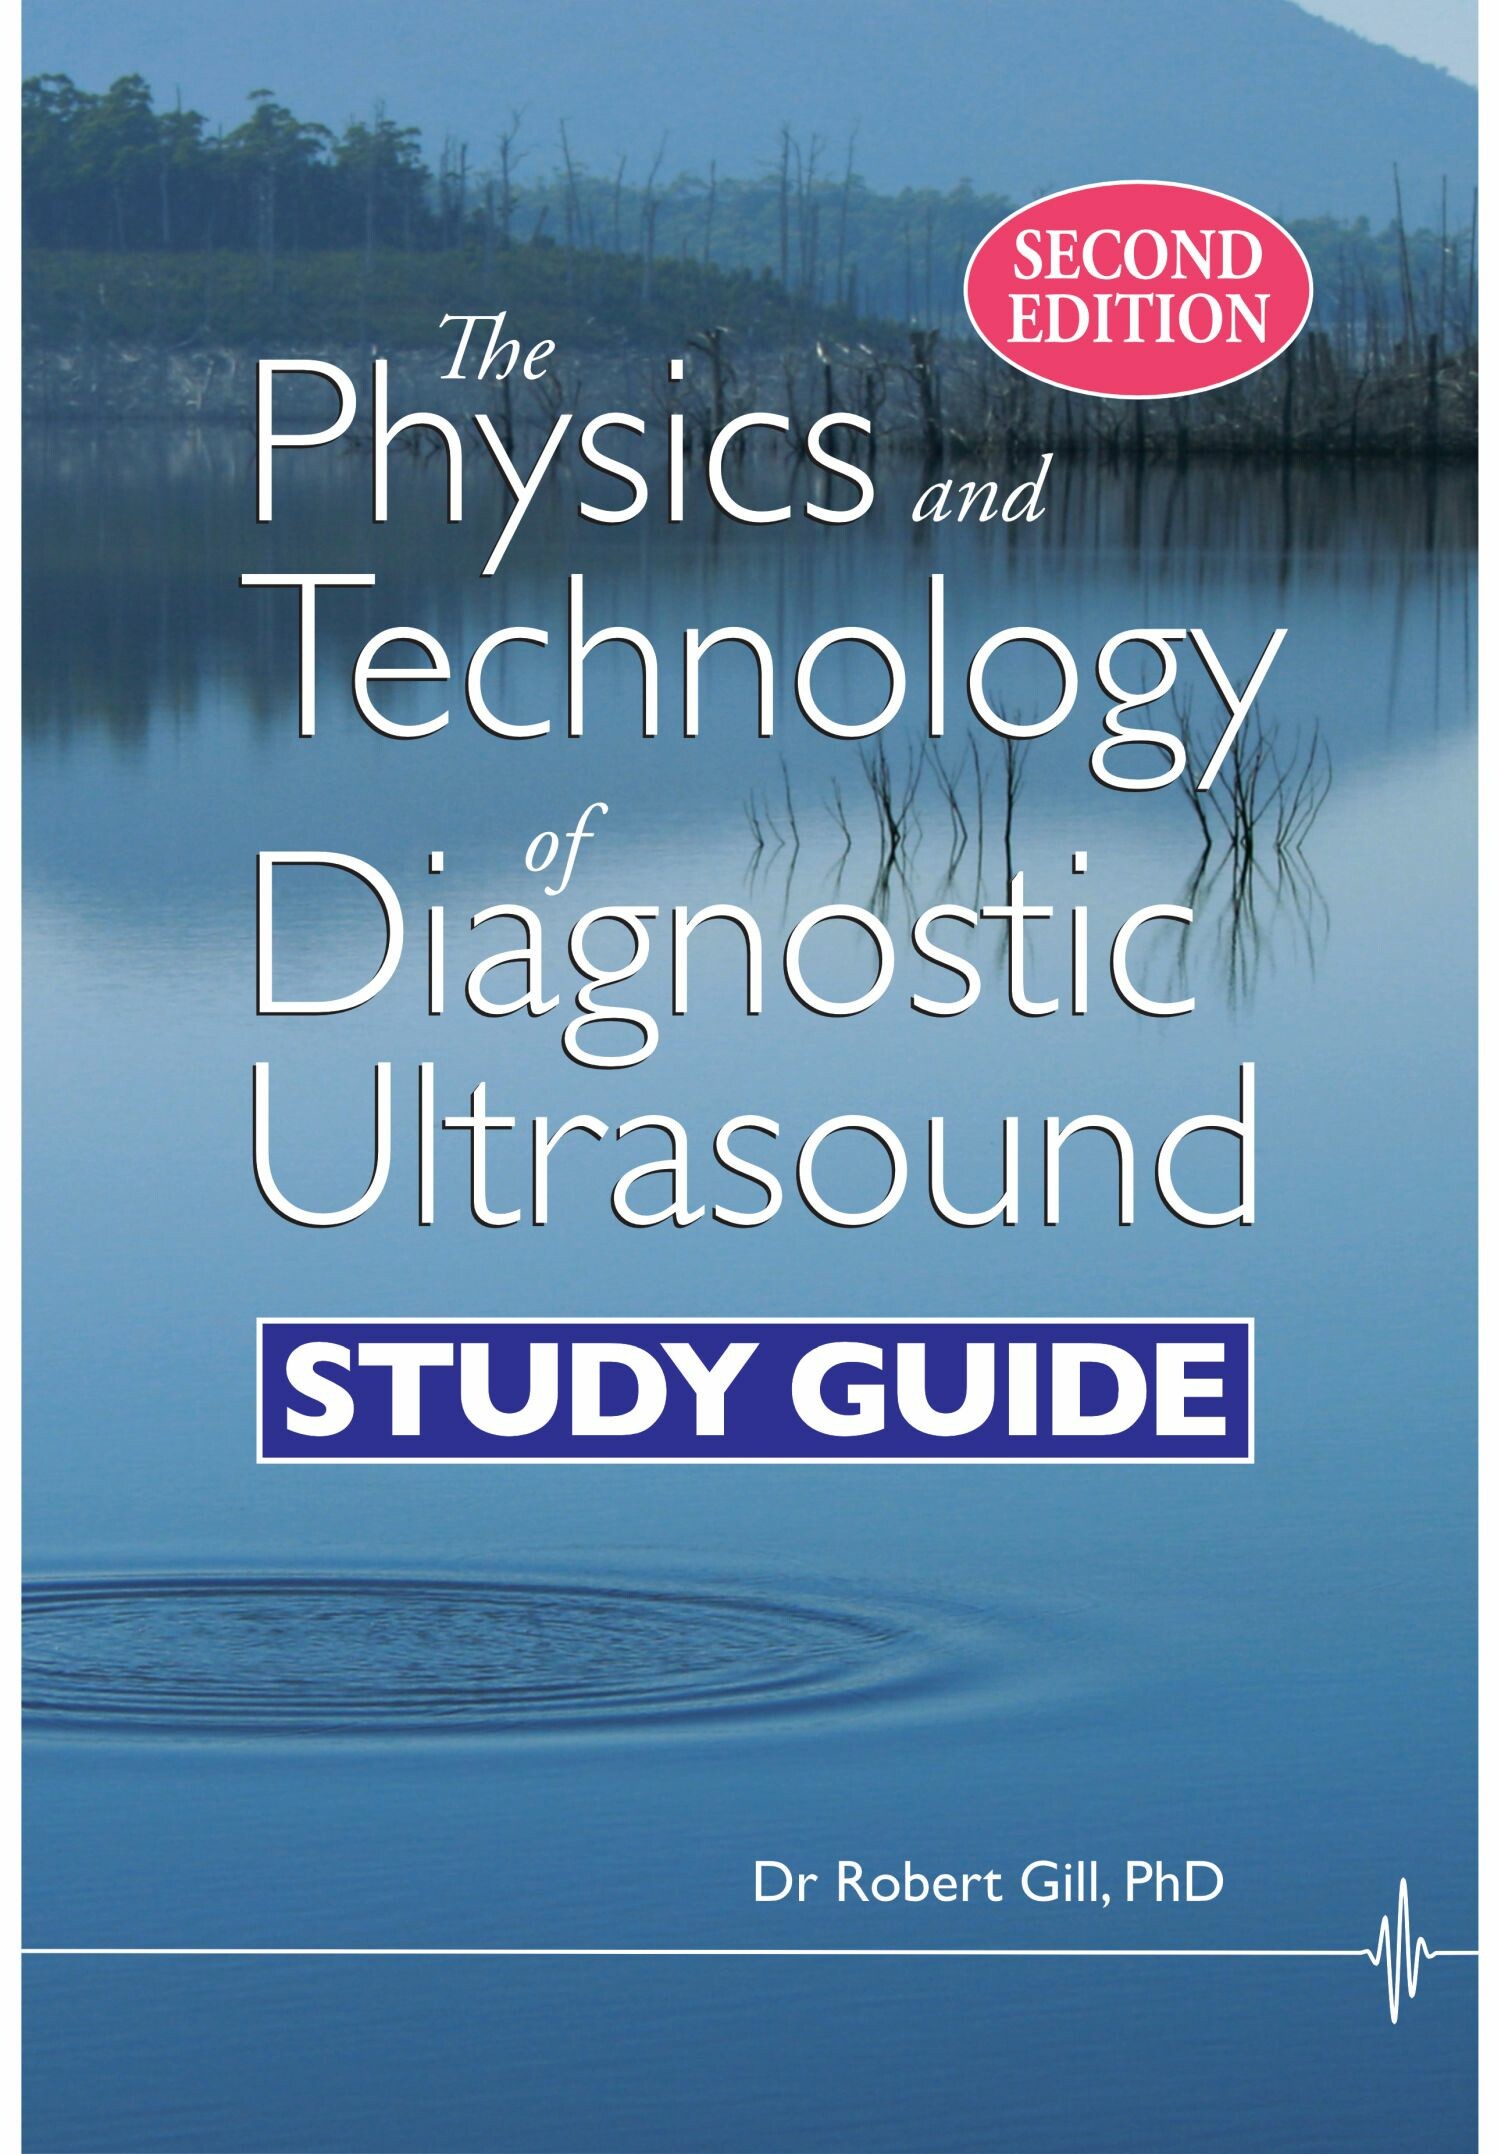 The Physics and Technology of Diagnostic Ultrasound (Second Edition)